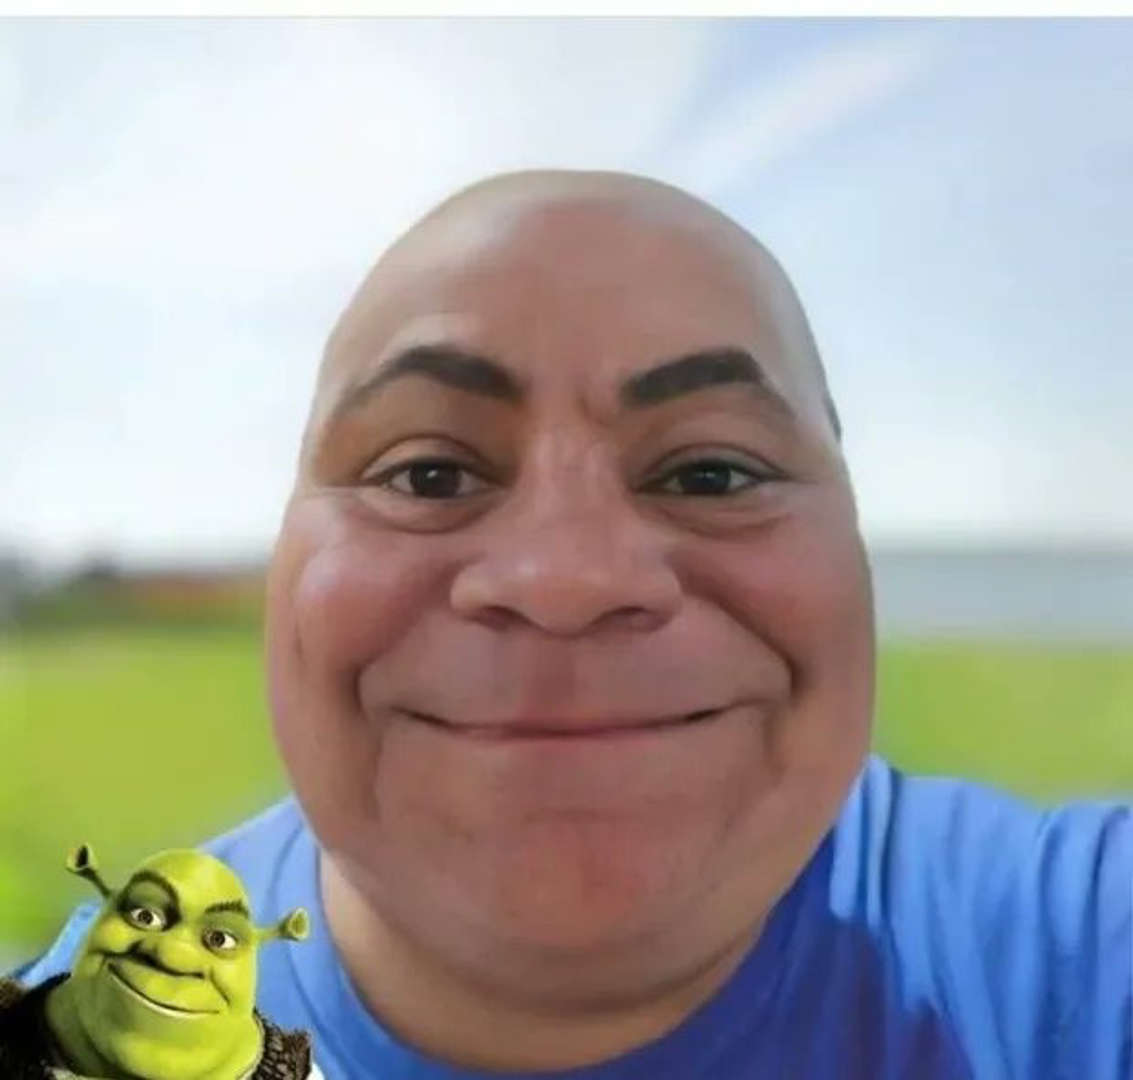 This is how Shrek characters would look like in real life according to the AI